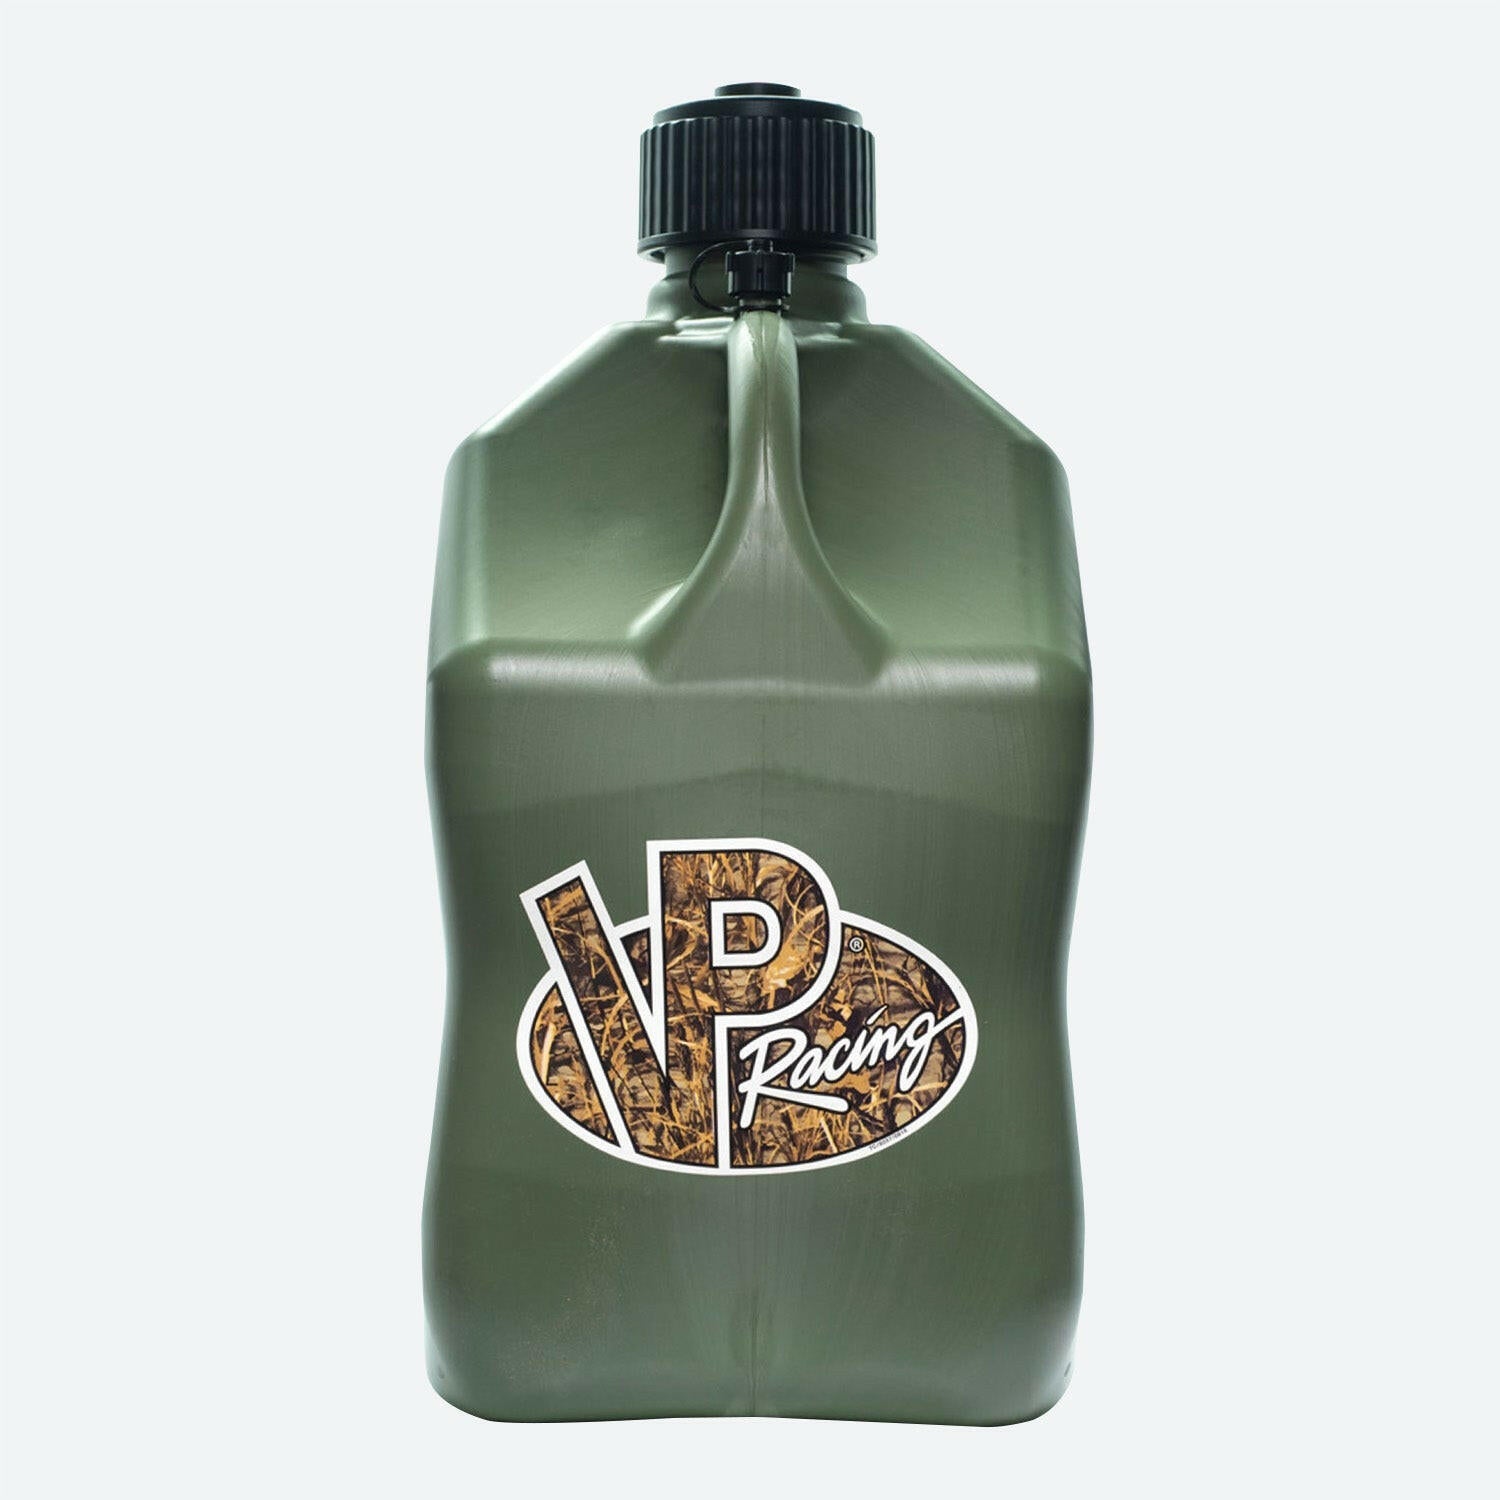 A green, rugged-looking 5.5-Gallon Motorsport Container®  utility jug - Square - with black cap. The front features a bold VP Racing logo with wood-patterned detailing inside the letters.